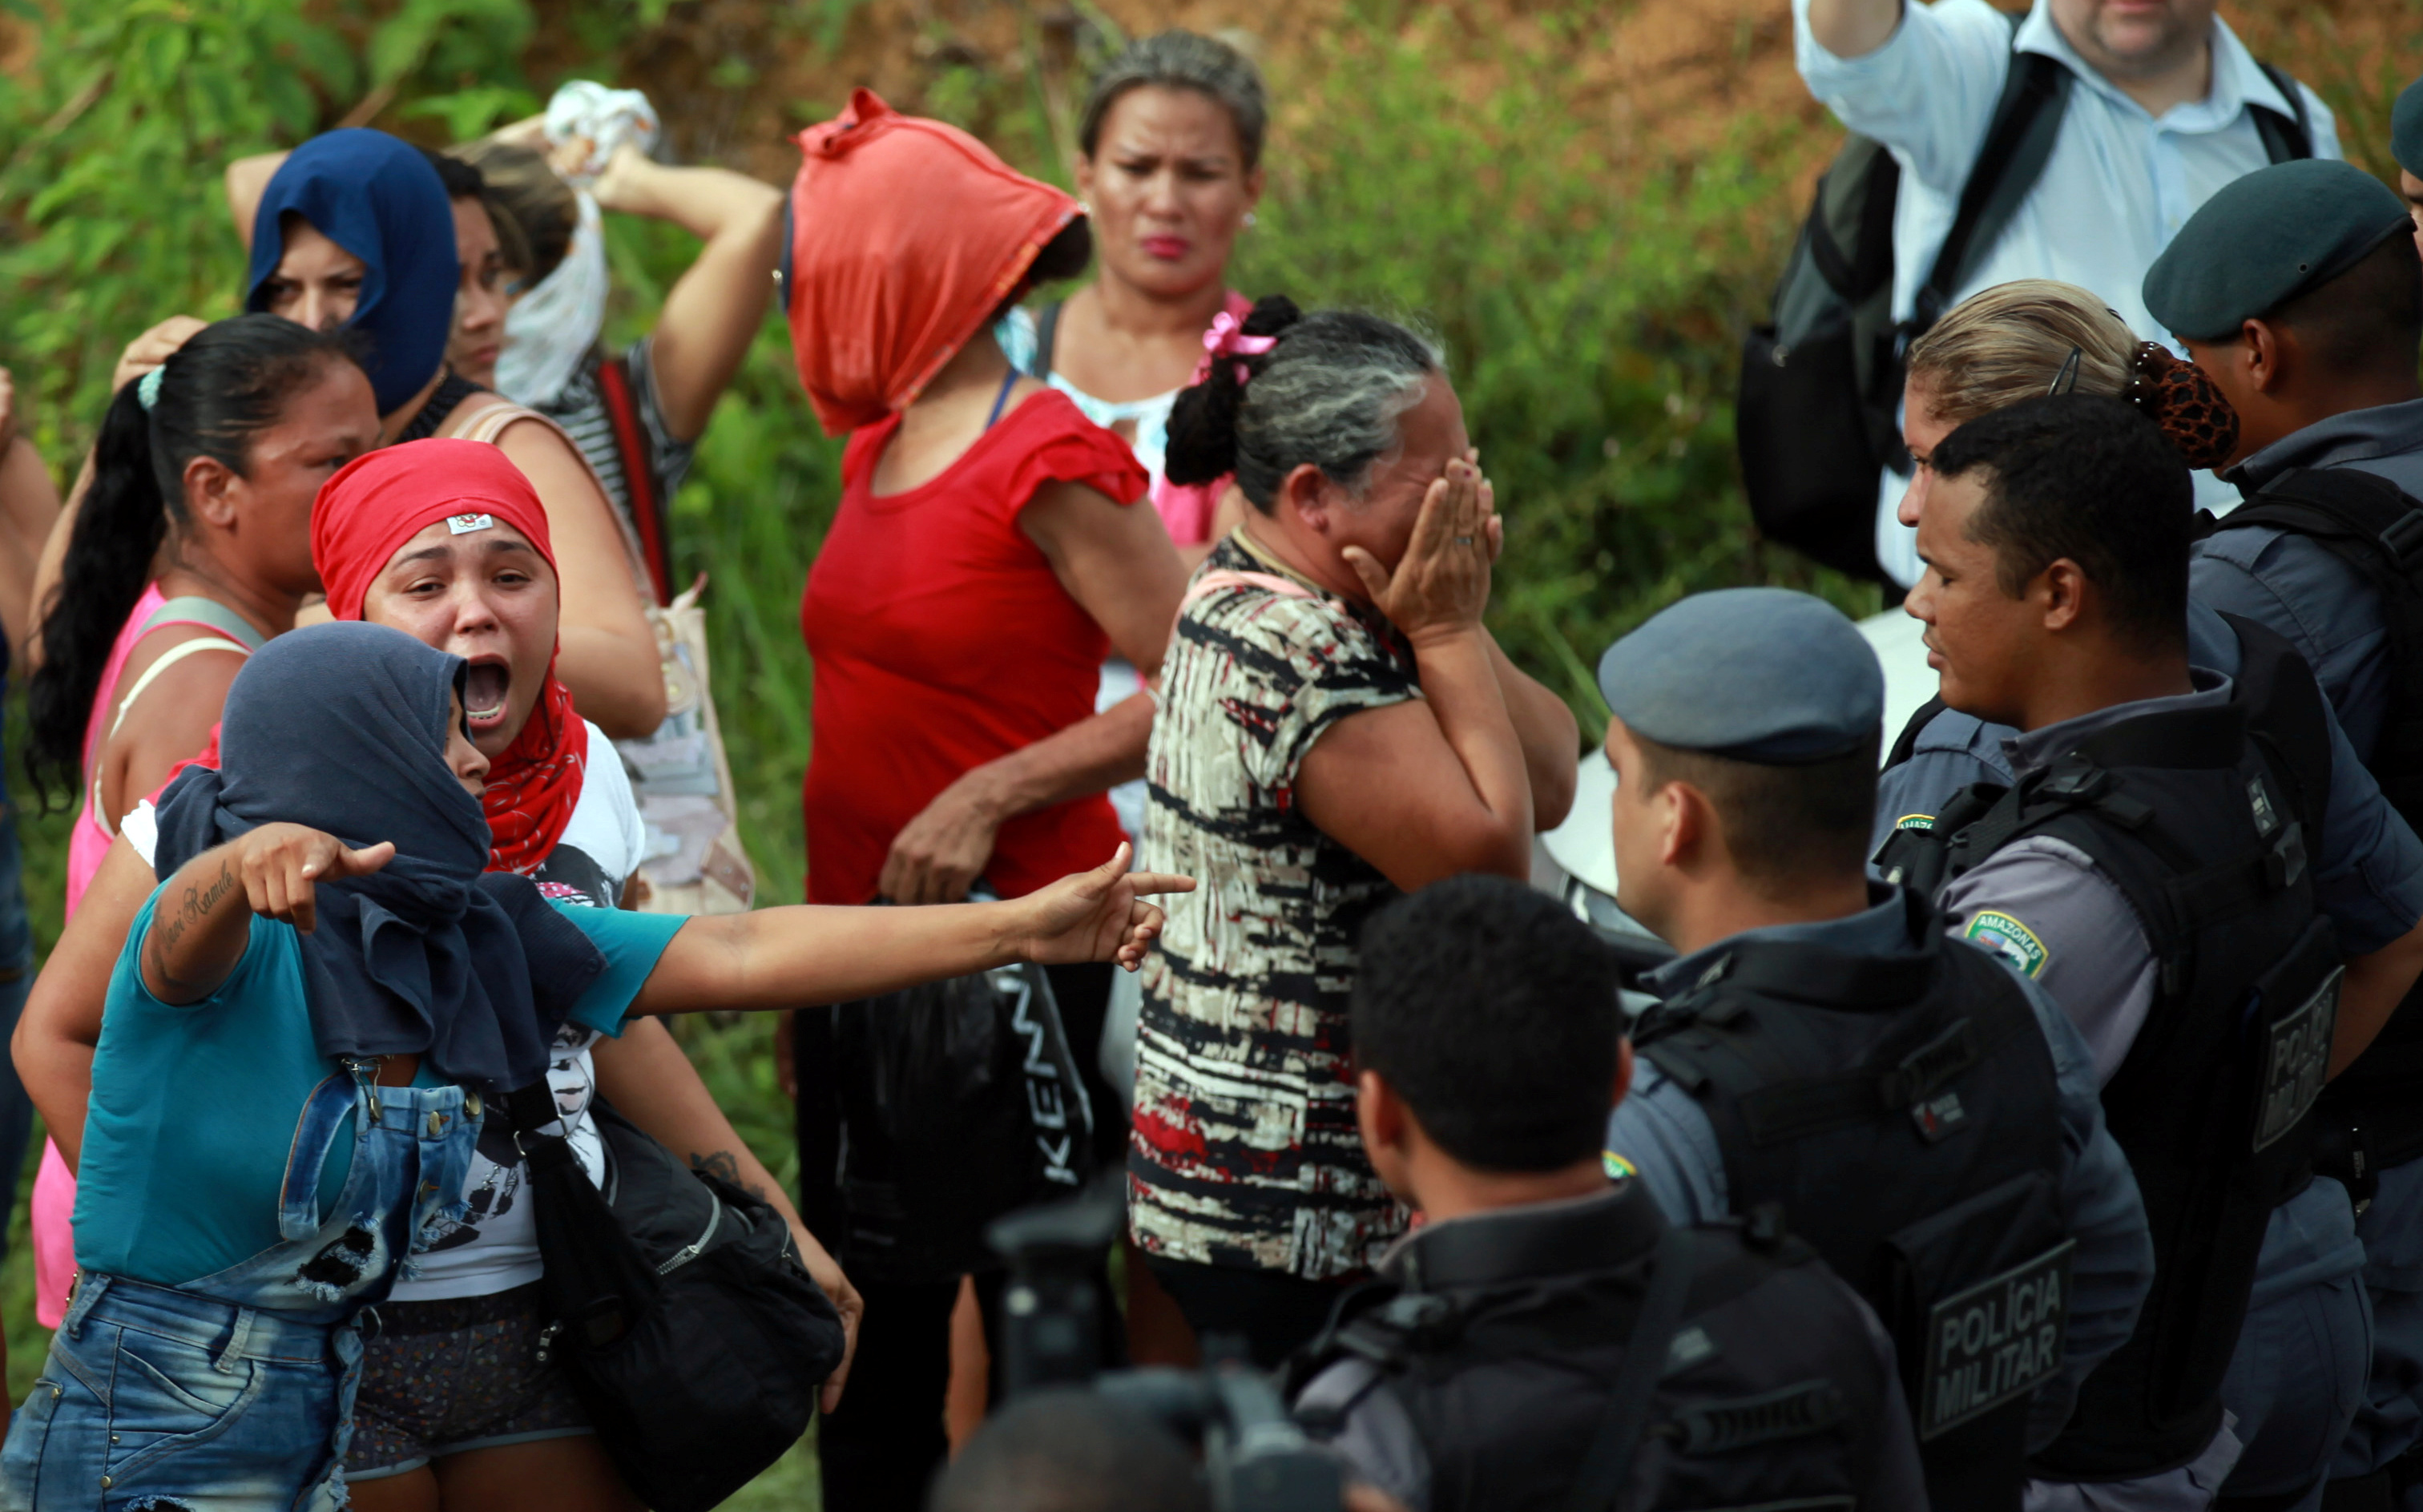 Relatives of prisoners react at a checkpoint close to the prison where around 60 people were killed in a prison riot in  Manaus, Brazil on Jan. 2, 2017. (Michael Dantas—Reuters)